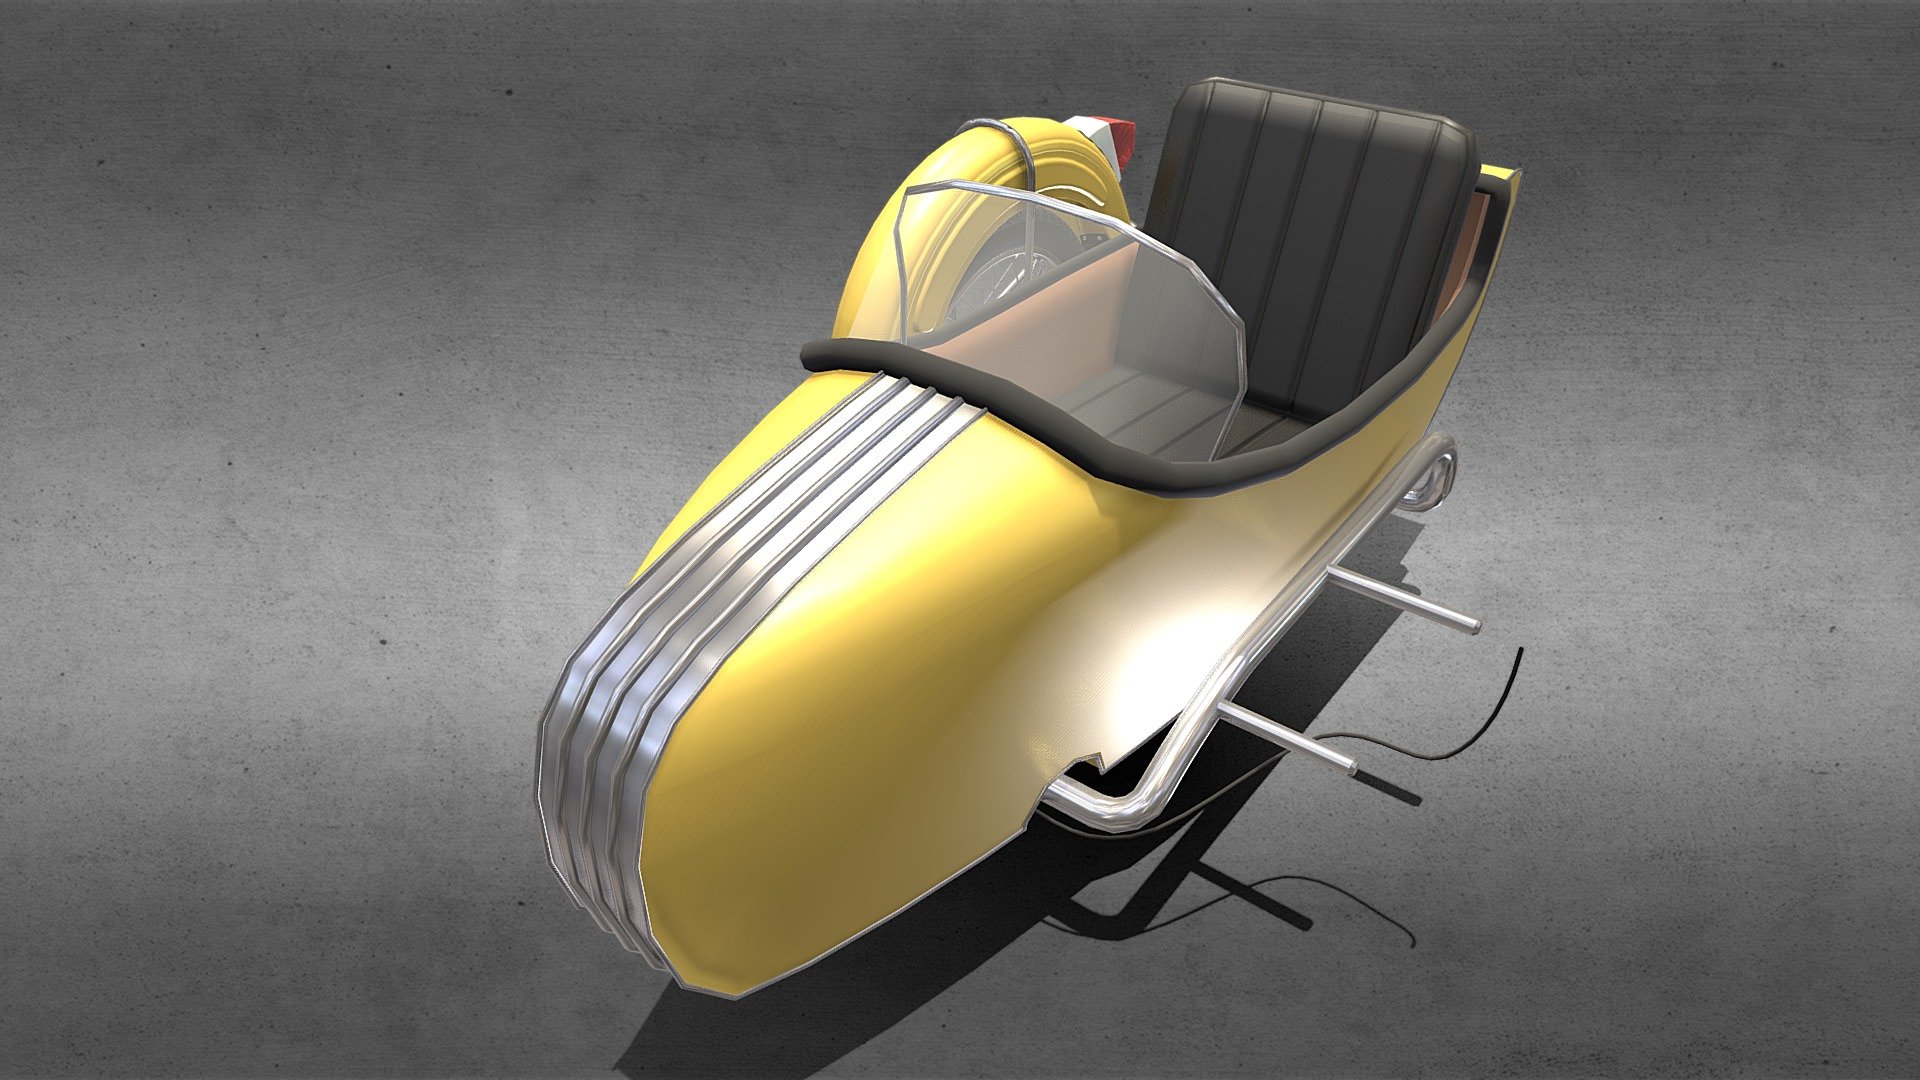 Highly detailed motorcycle sidecar 3d model rendered with Cycles in Blender, as per seen on attached images. 

The 3d model is scaled to original size in Blender.

It comes with 2 versions per format, one with solid modeled tires and the other one lower poly with tire details resulted from a bump map. The original poly count is for the lower poly version.
File formats:
-.blend, rendered with cycles, as seen in the images;
-.blend, with low poly tire, rendered with cycles, as seen in the images;
-.obj, with materials applied;
-.obj, with low poly tire, with materials applied;
-.dae, with materials applied;
-.dae, with low poly tire, with materials applied;
-.fbx, with materials applied;
-.fbx, with low poly tire, with materials applied;
-.stl;
Files come named appropriately and split by file format.
3D Software:
The 3D model was originally created in Blender 2.8 and rendered with Cycles.
Materials and textures:

Don't forget to rate and enjoy! - Motorcycle sidecar - Buy Royalty Free 3D model by dragosburian 3d model